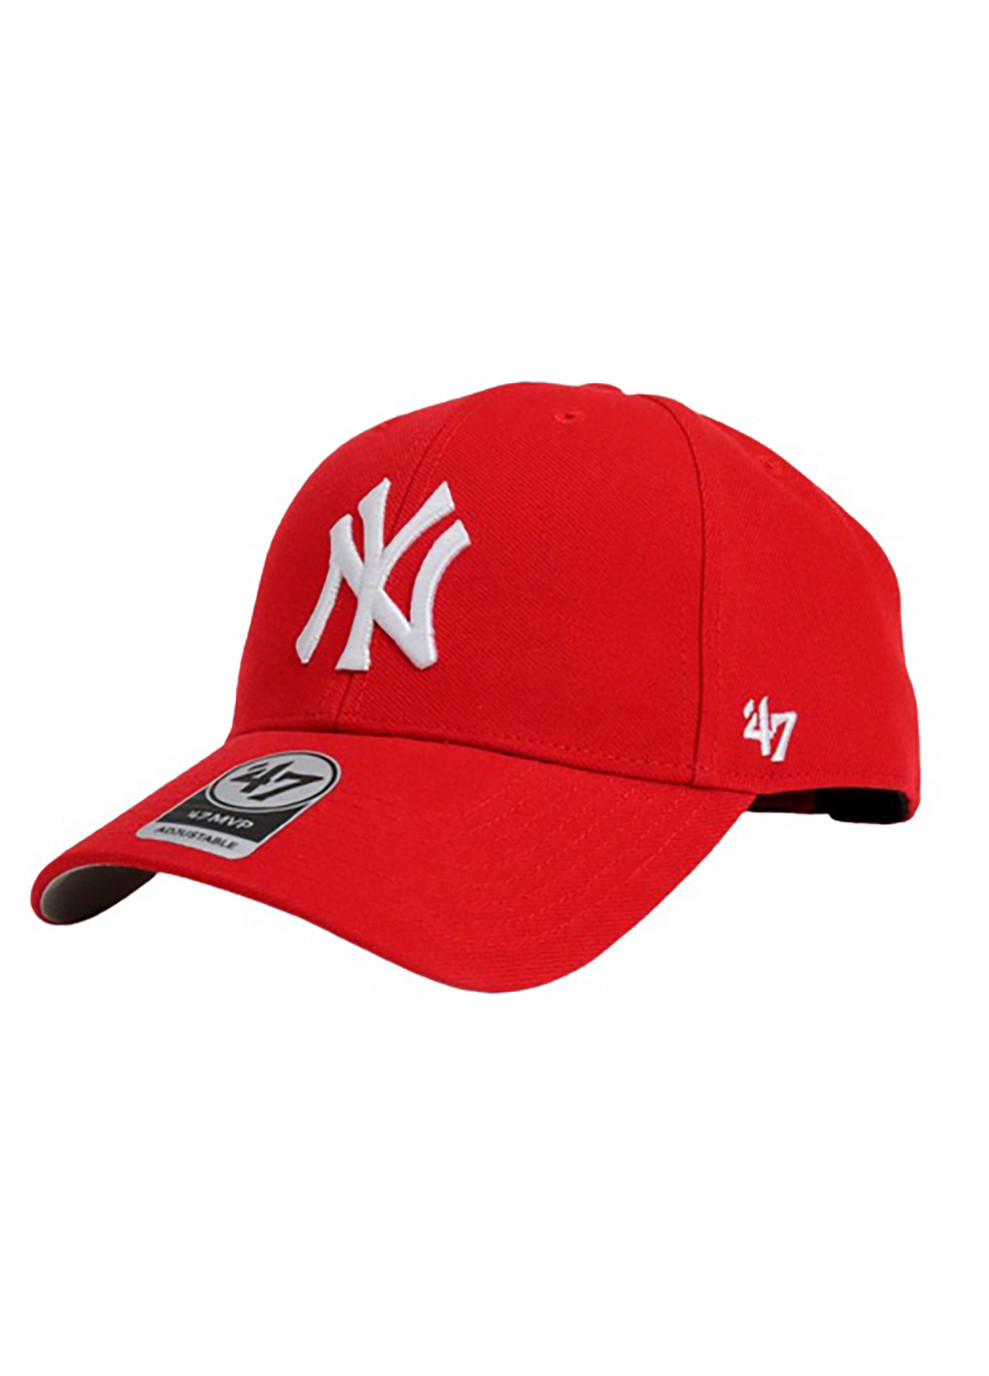 Кепка MVP YANKEES/YANKEES One Size Grey/Red 47 Brand (258144427)